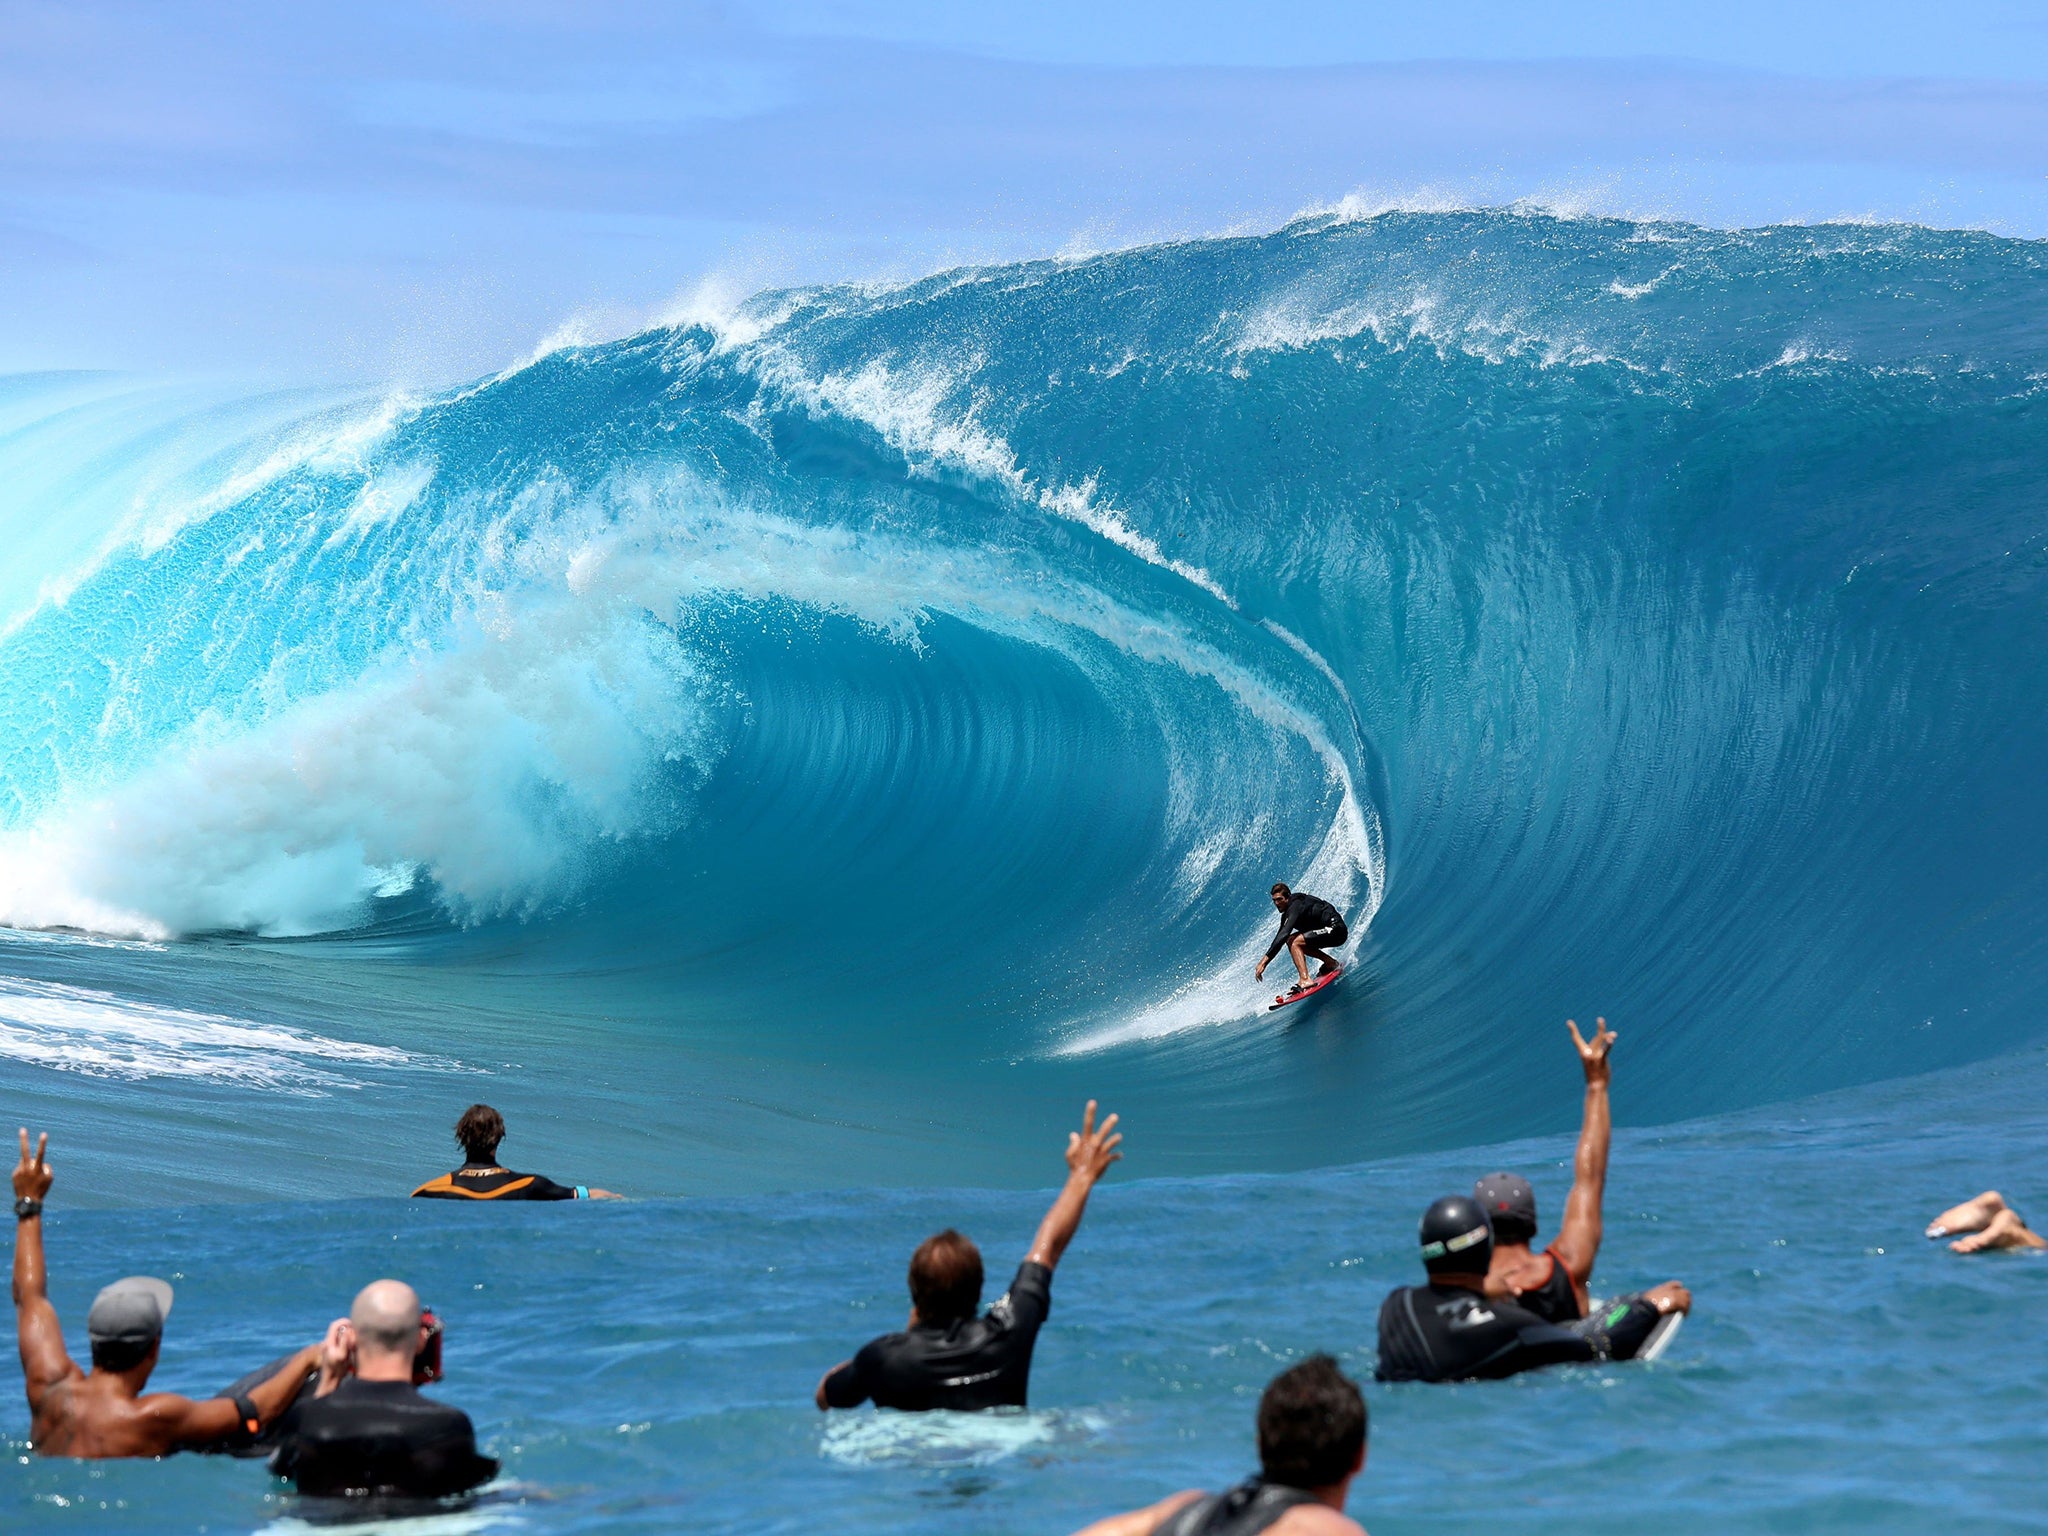 Takanui Smith rides a wave